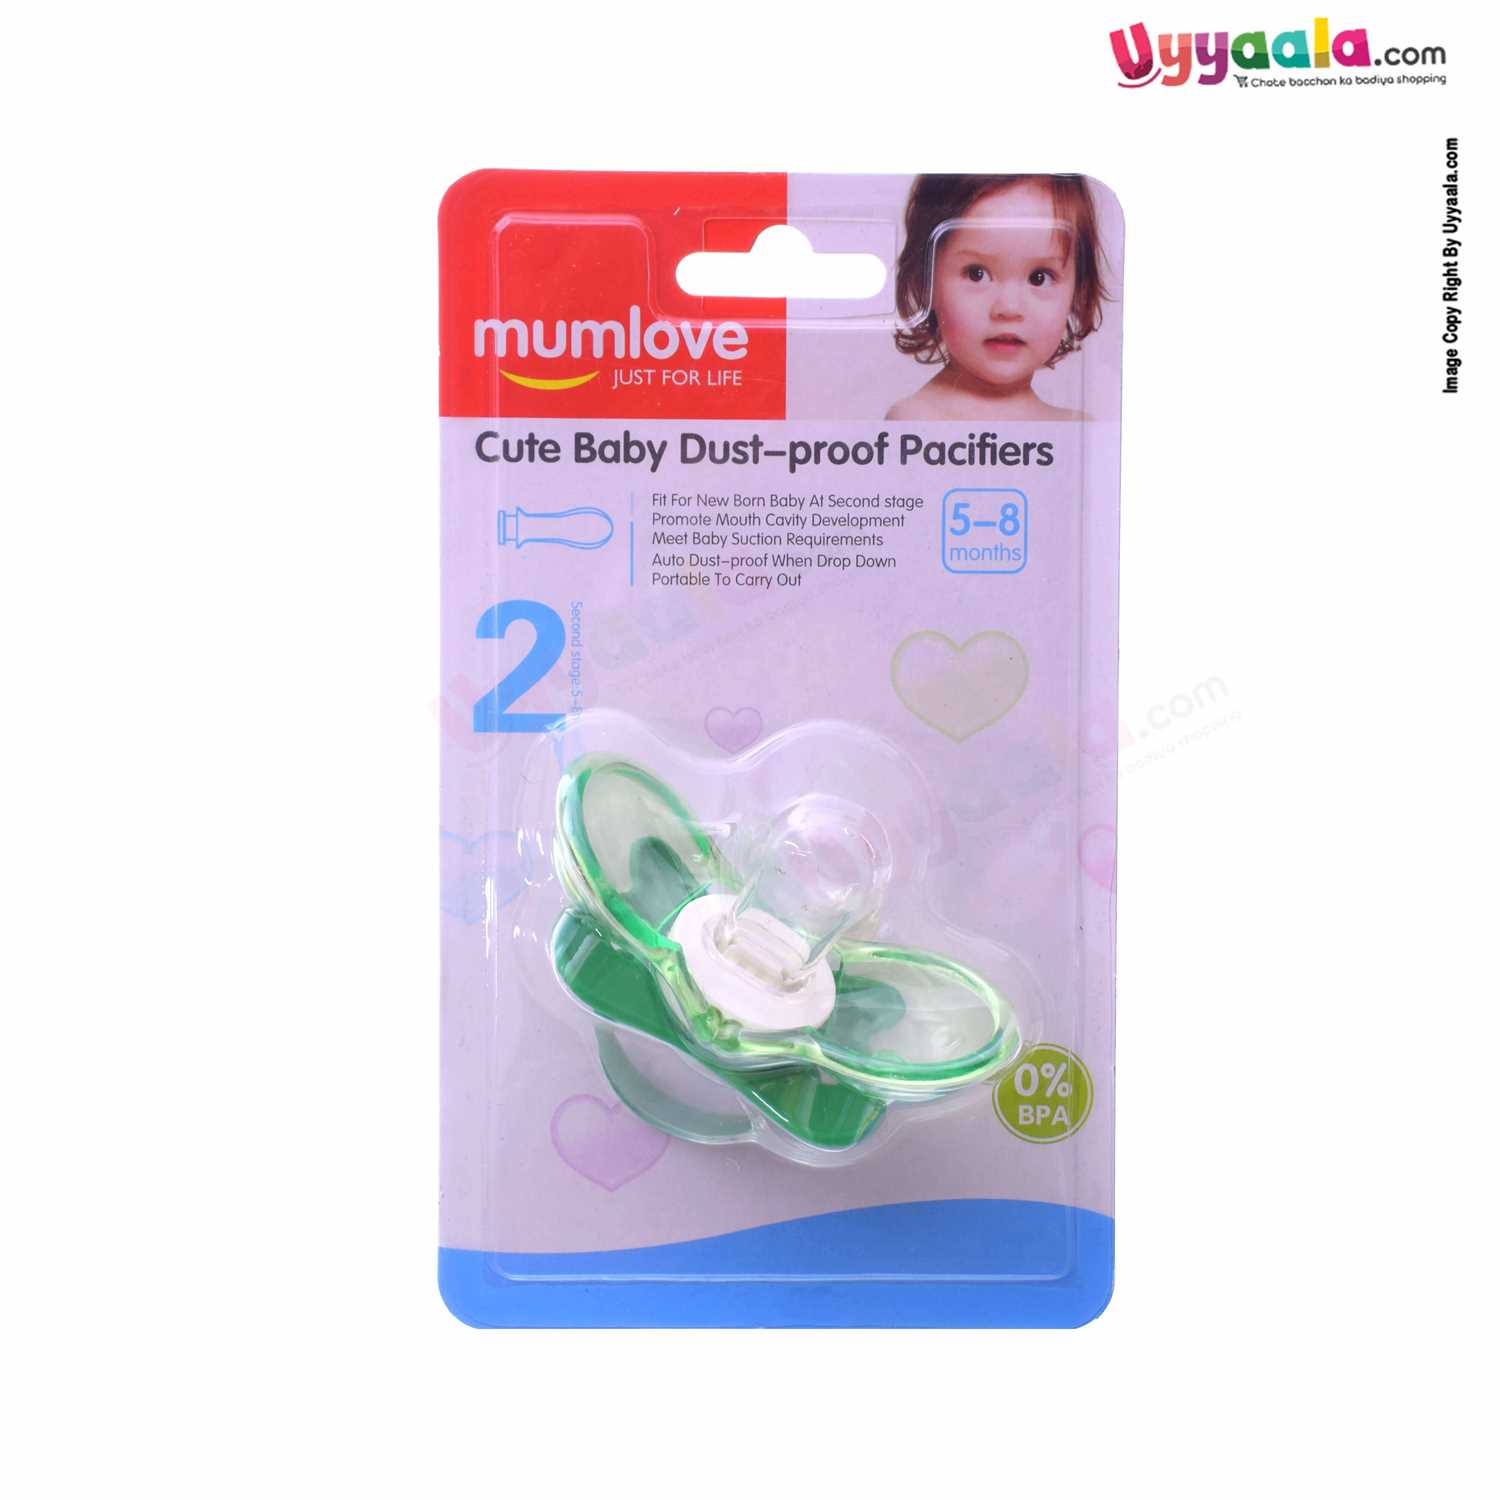 MUMLOVE Cute Baby Dust Proof Soothers/Pacifiers 5-8m - Green